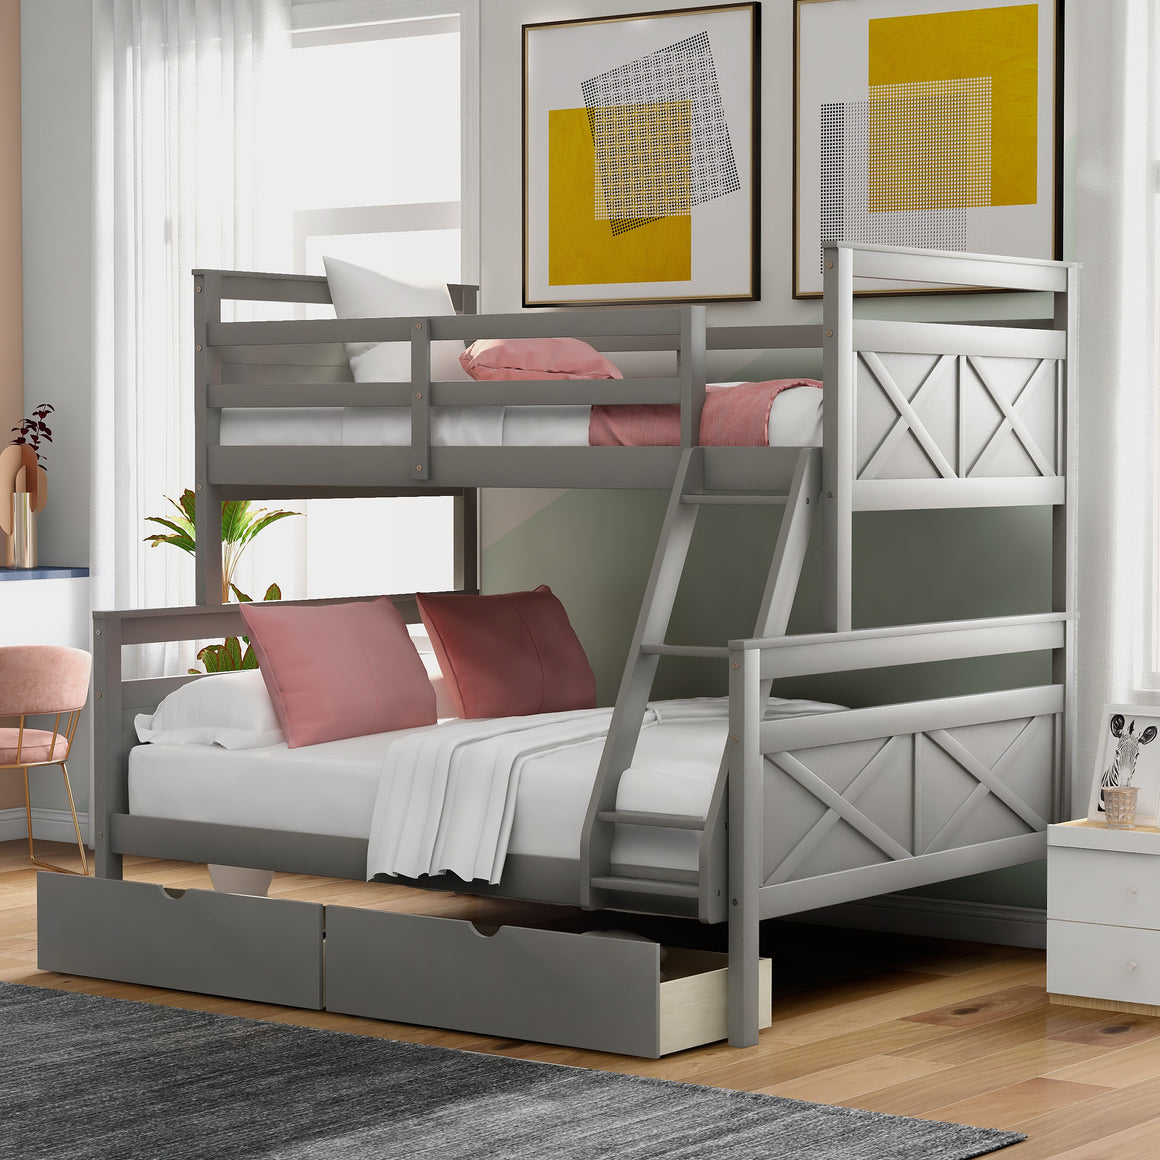 uhomepro Bunk Bed with 2 Storage Drawers, Twin over Full Solid Wood Bunk Bed for Kids Teens Adults, Can be Convertible into 2 Beds, No Box Spring Needed, Gray